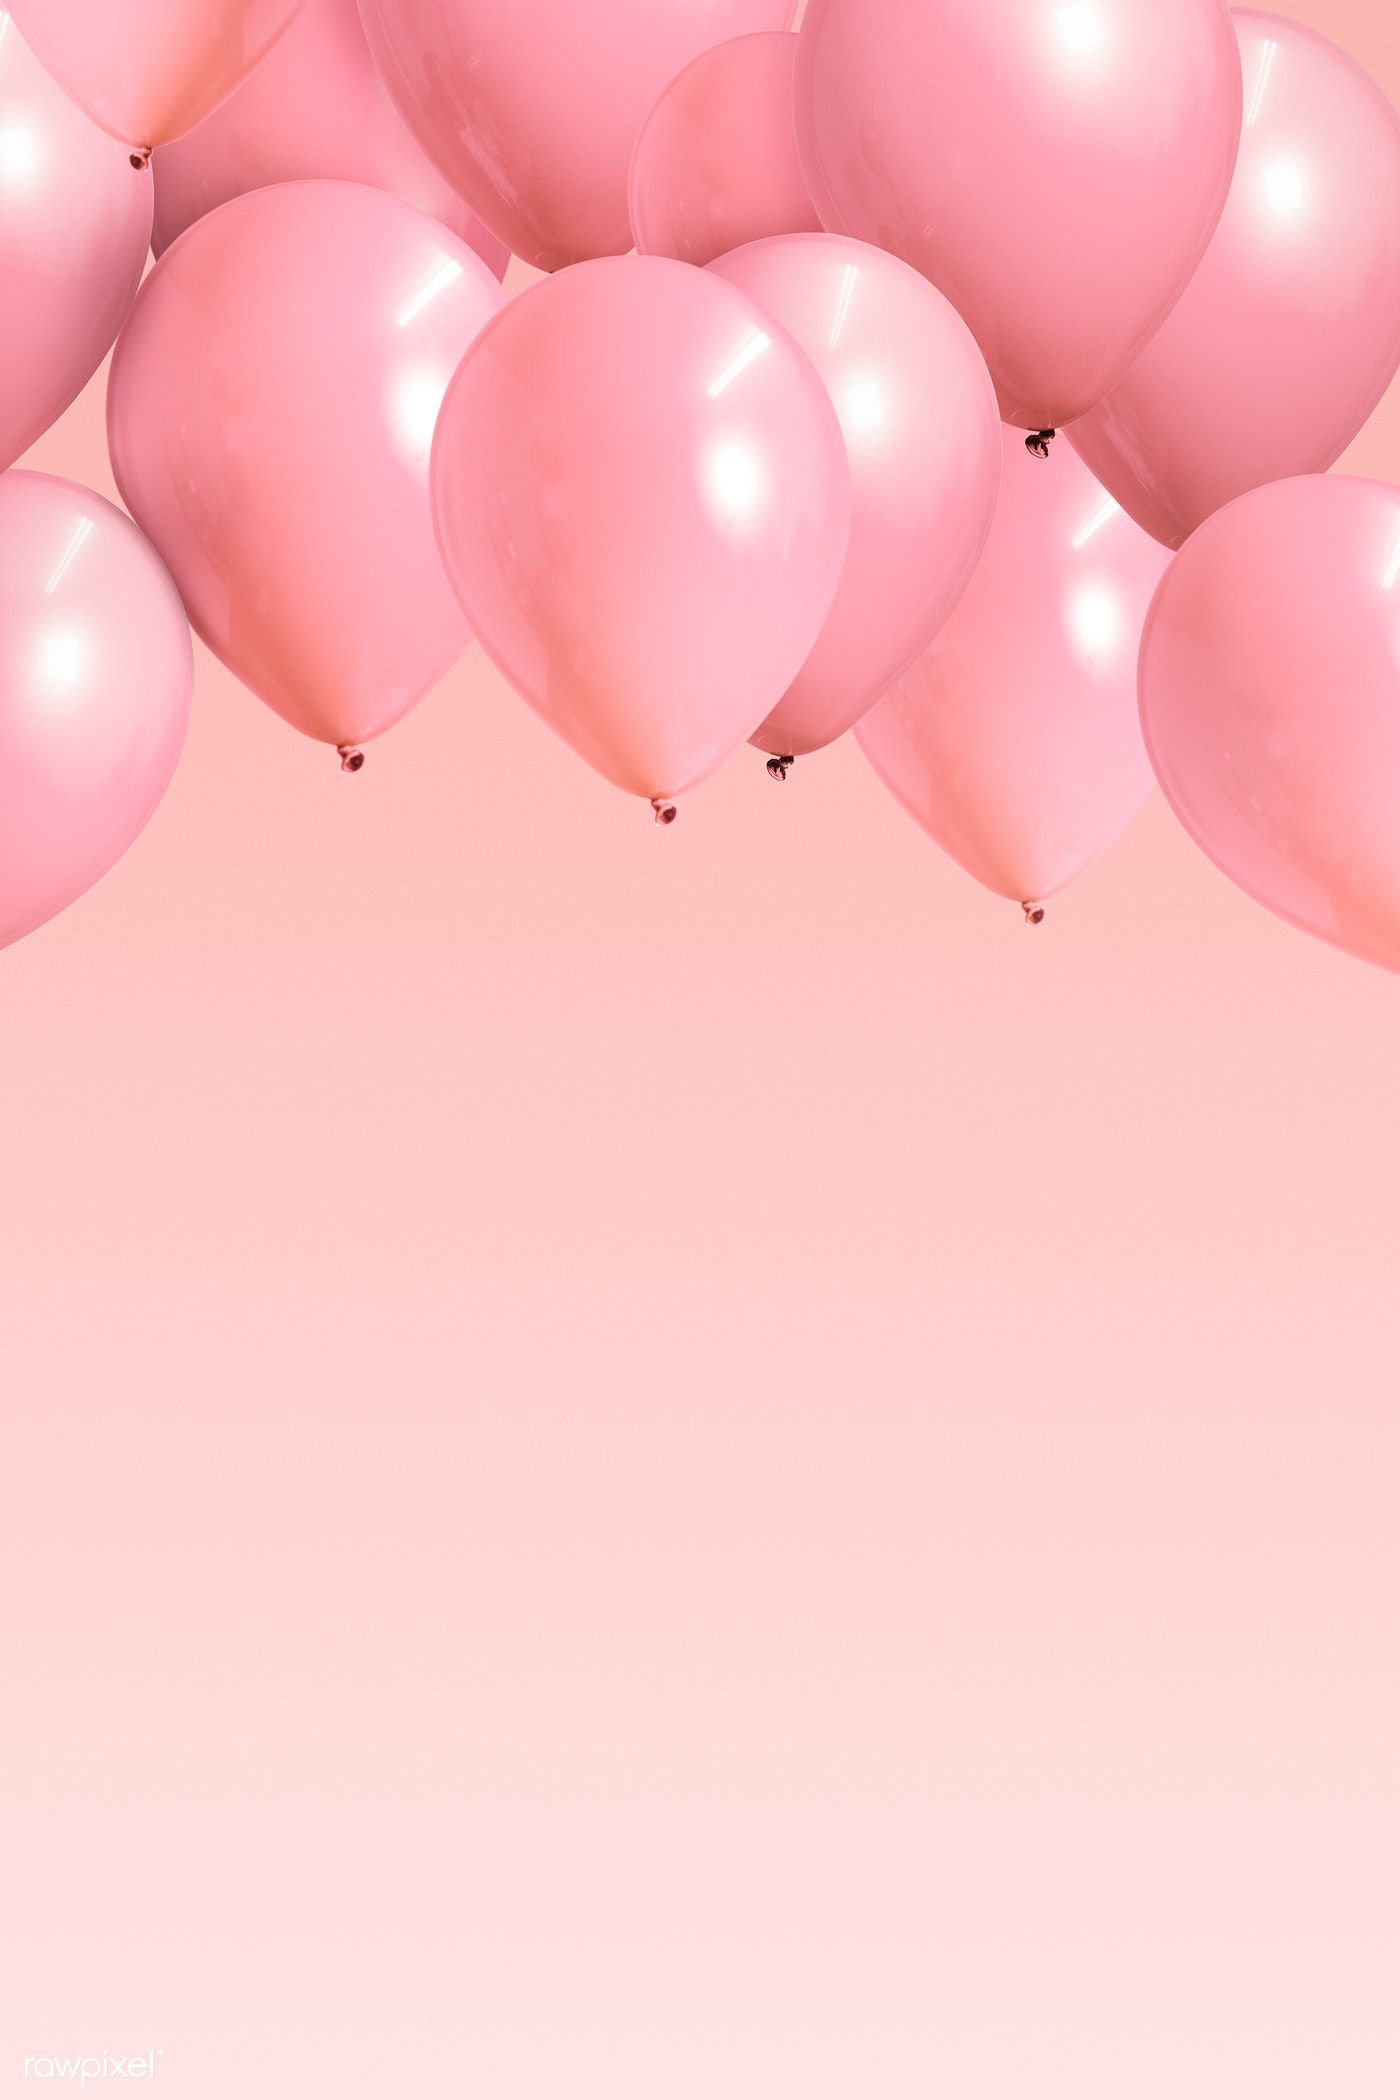 Pink Balloons Pictures  Download Free Images on Unsplash